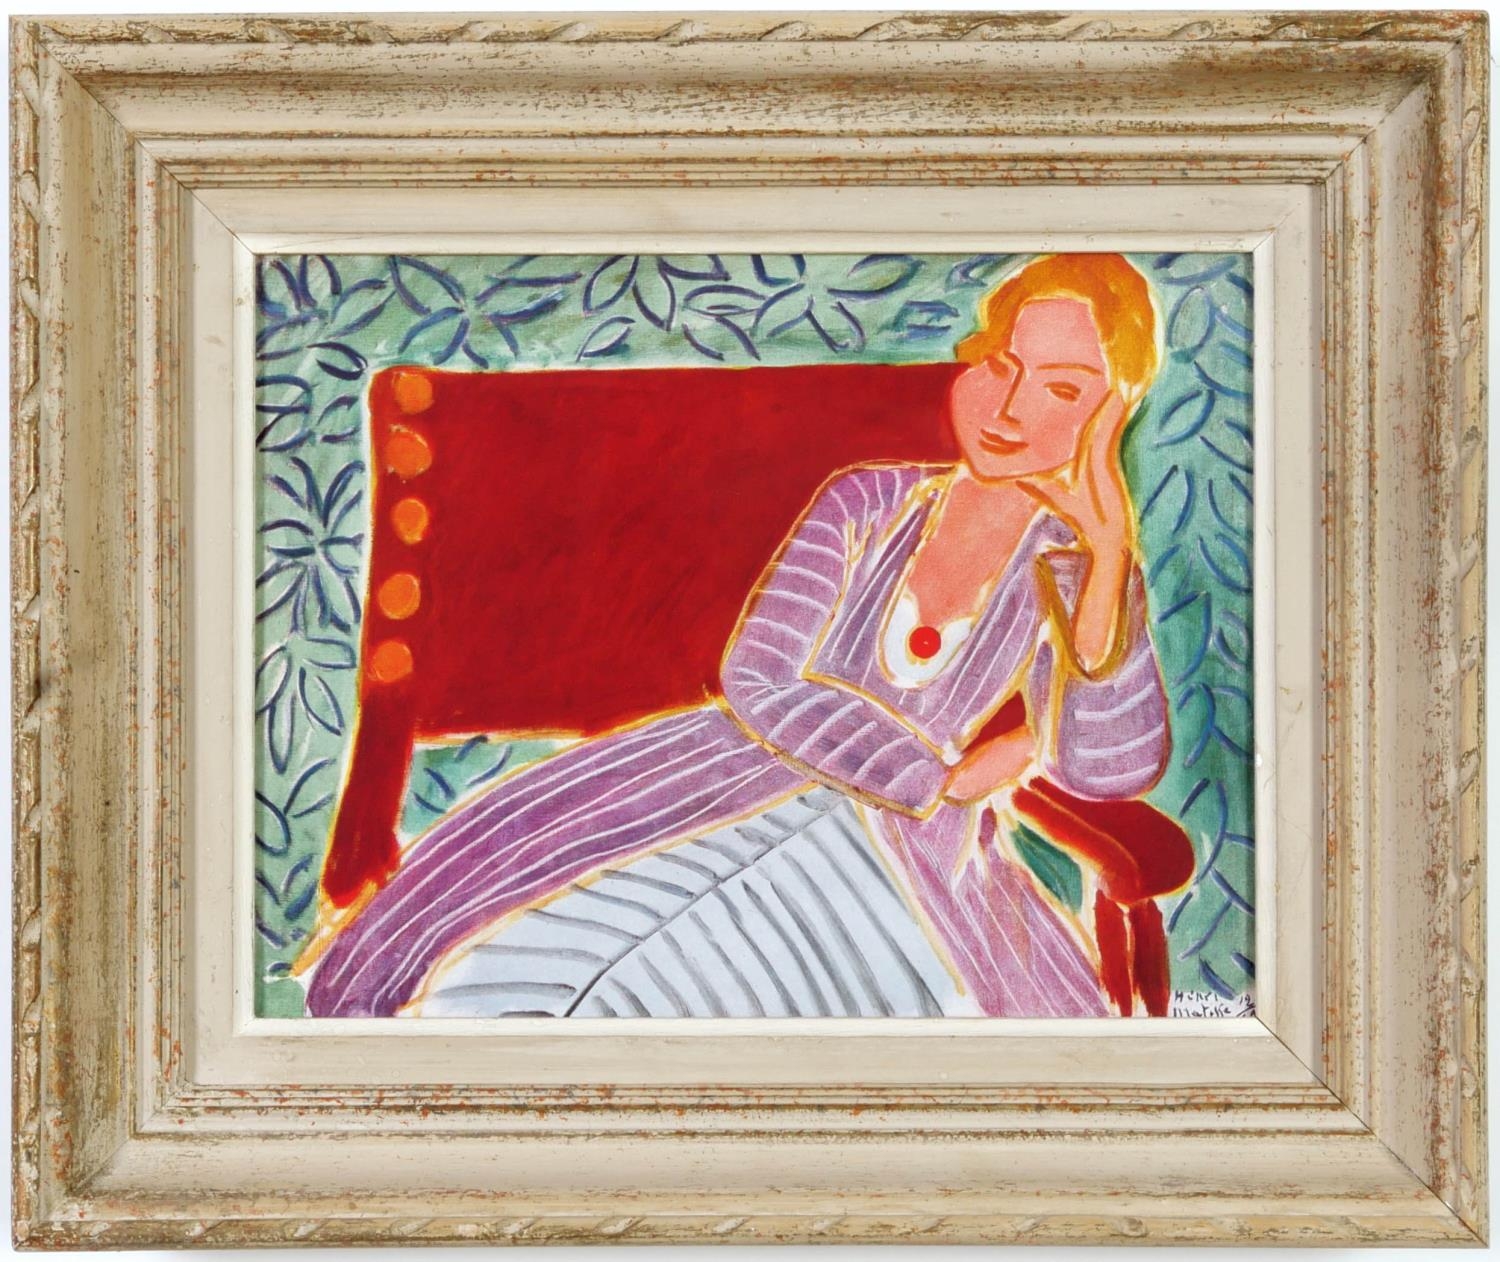 HENRI MATISSE, Jeune Femme Assise, signed in the plate, off set lithograph, vintage French frame,